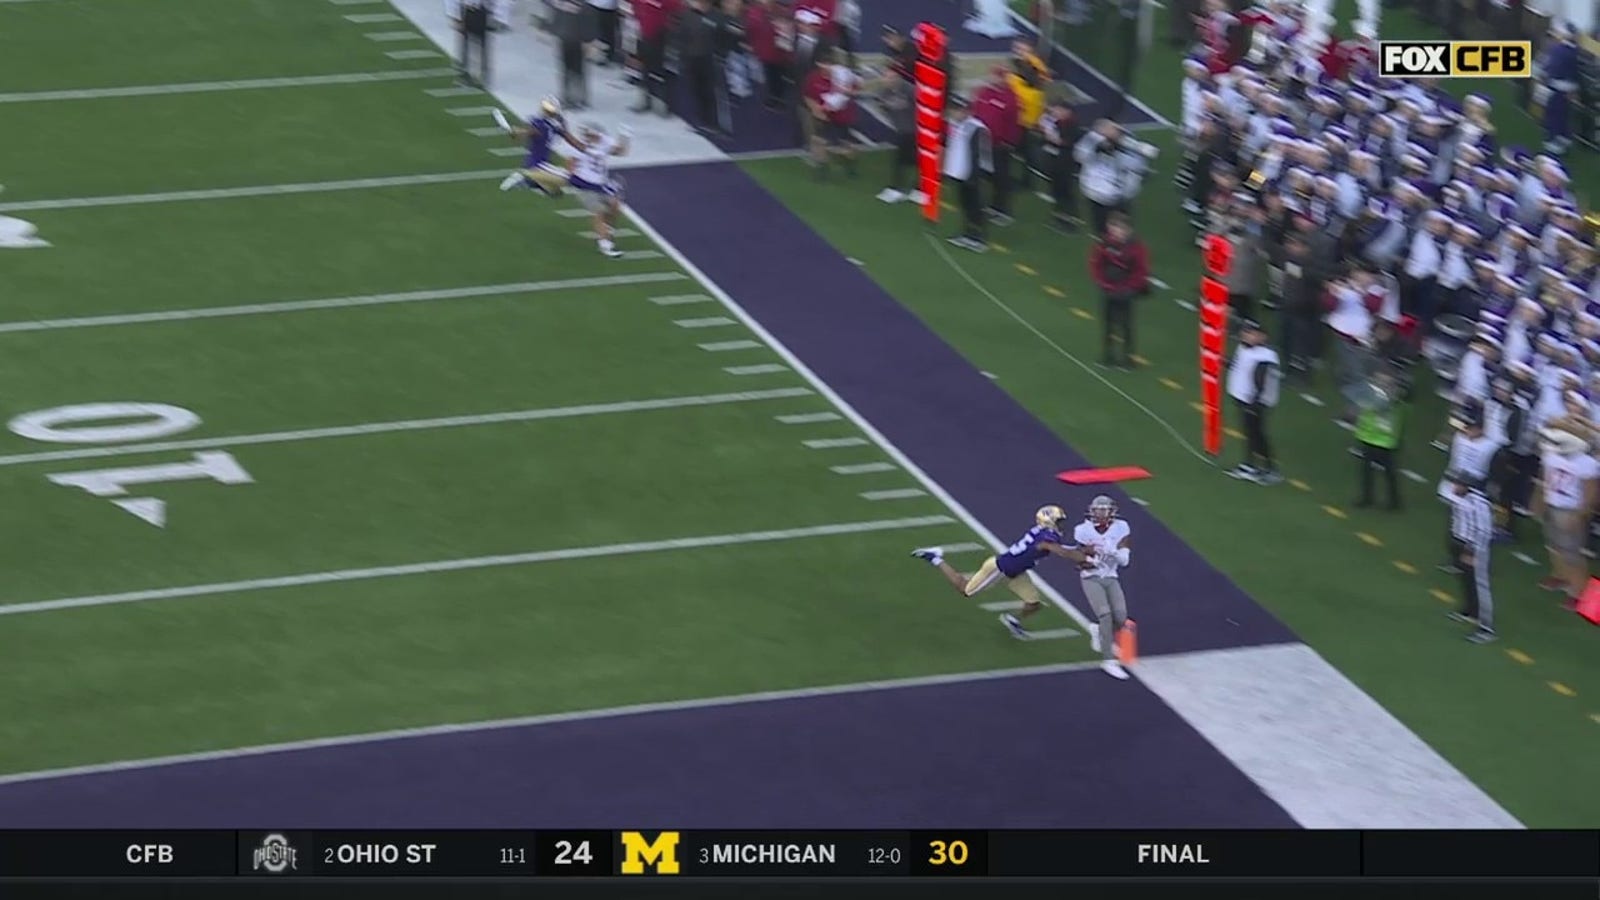 WSU's Kyle Williams makes a GORGEOUS catch on a 25-yard receiving TD